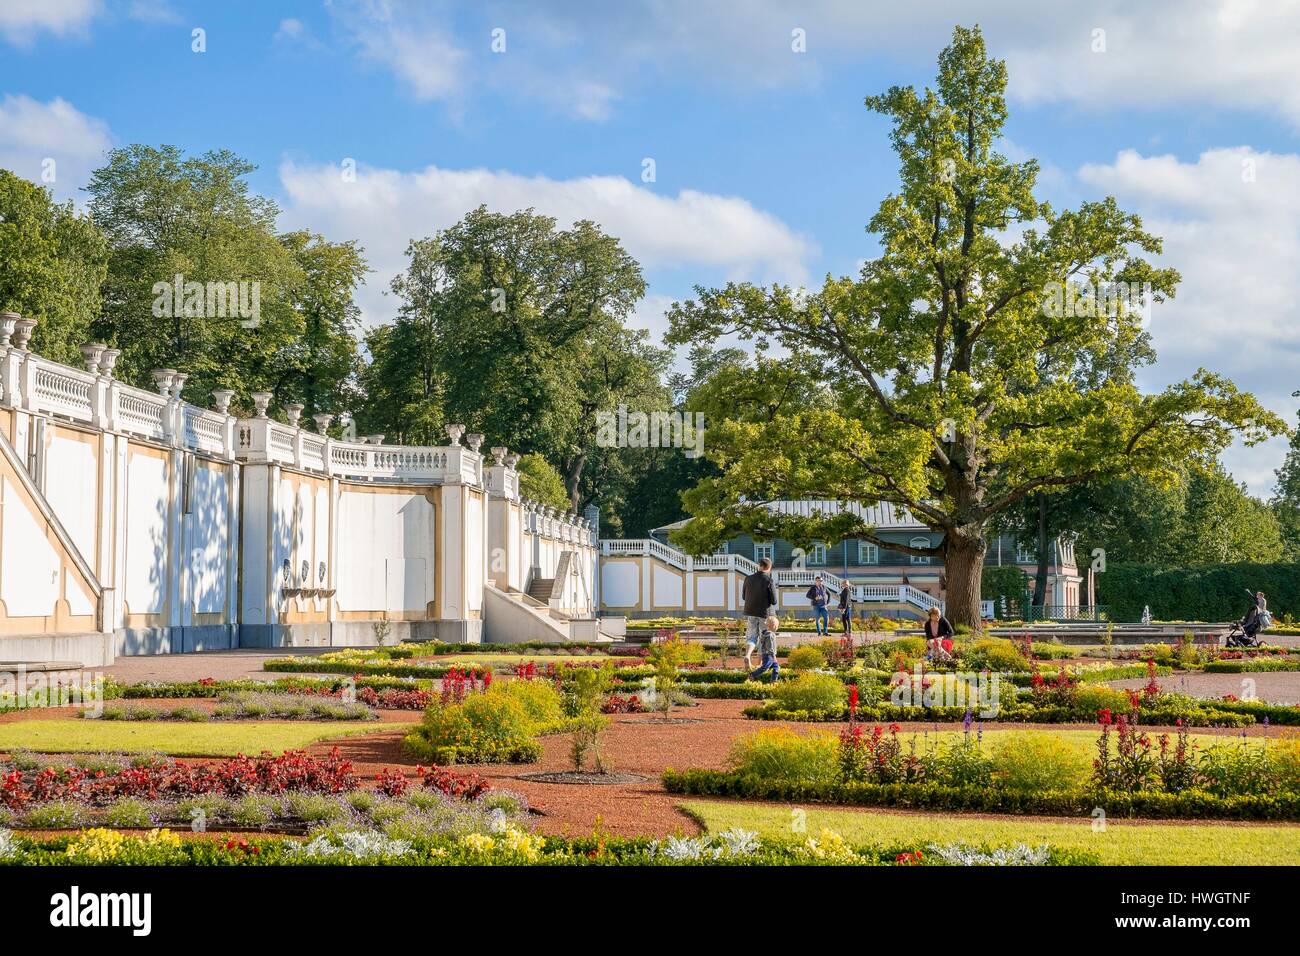 Estonia (Baltic States), Harju region, Tallinn, historical center listed as World Heritage by UNESCO, Kadriorg Palace, located in Kadriorg Park, built in 1718 by the Italian architect Niccolò Michetti for Tsar Peter the Great and His wife Catherine 1st, Weizenbergi 37 Stock Photo